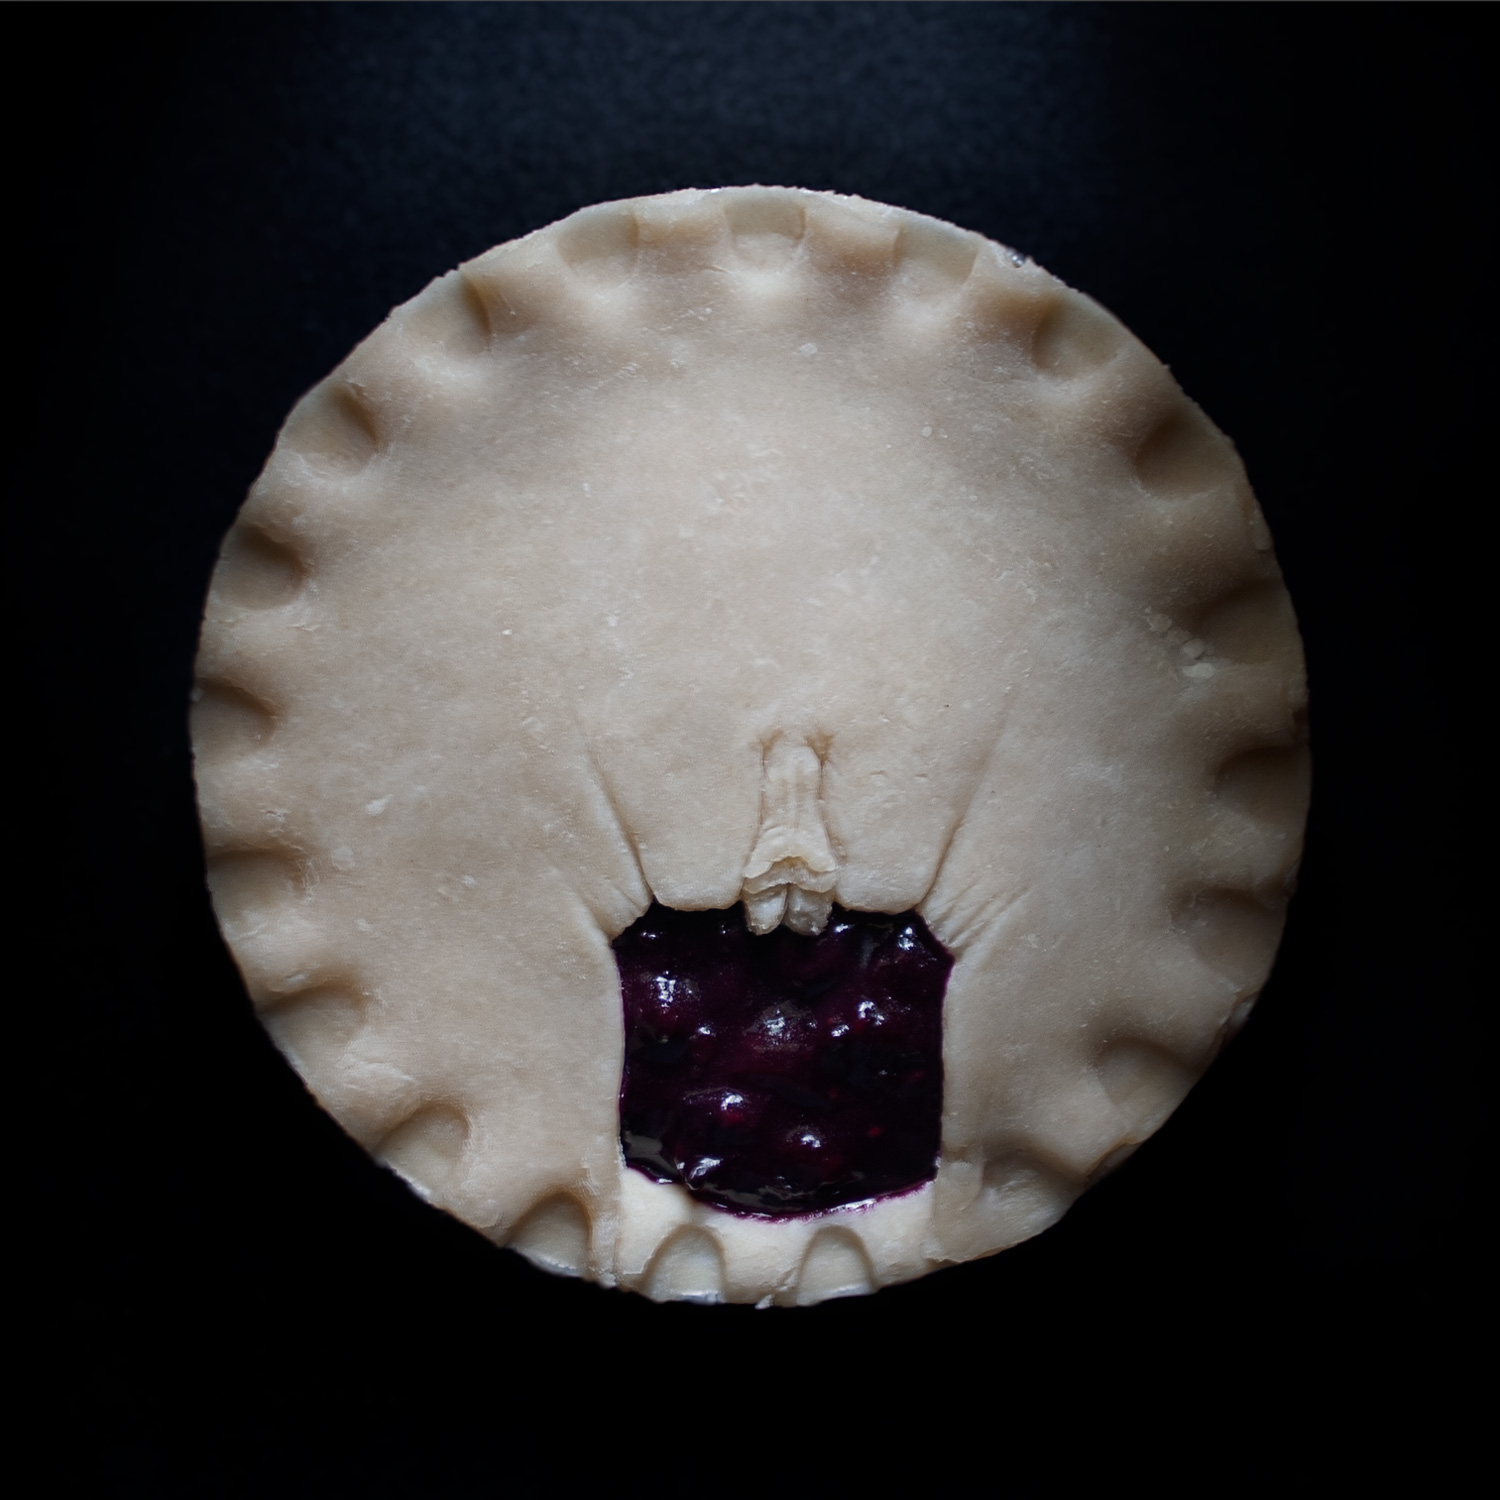 Pie 16, a pie sculpted to appear like a vulva